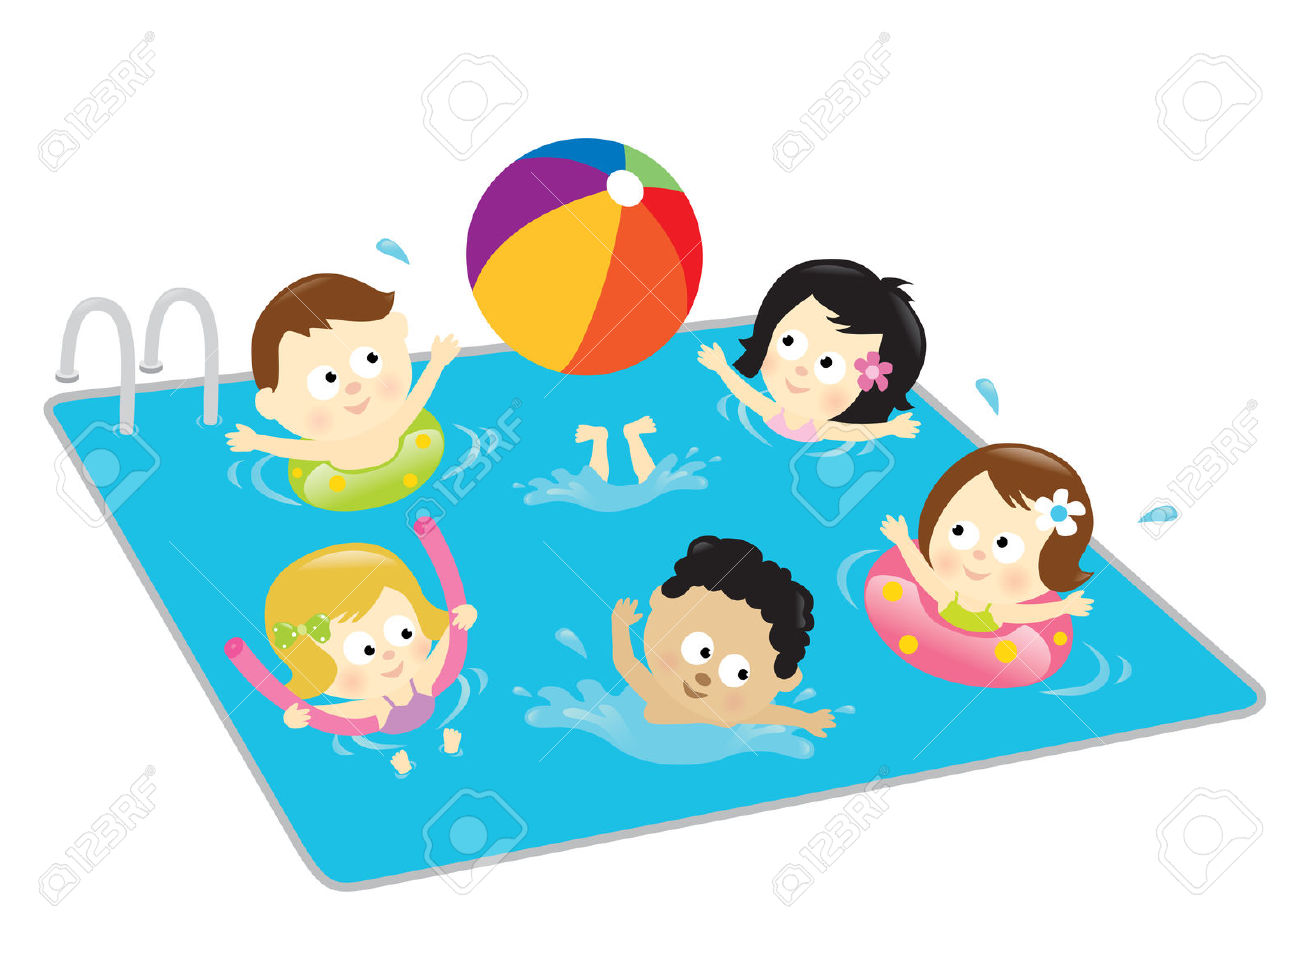 clipart child swimming pool